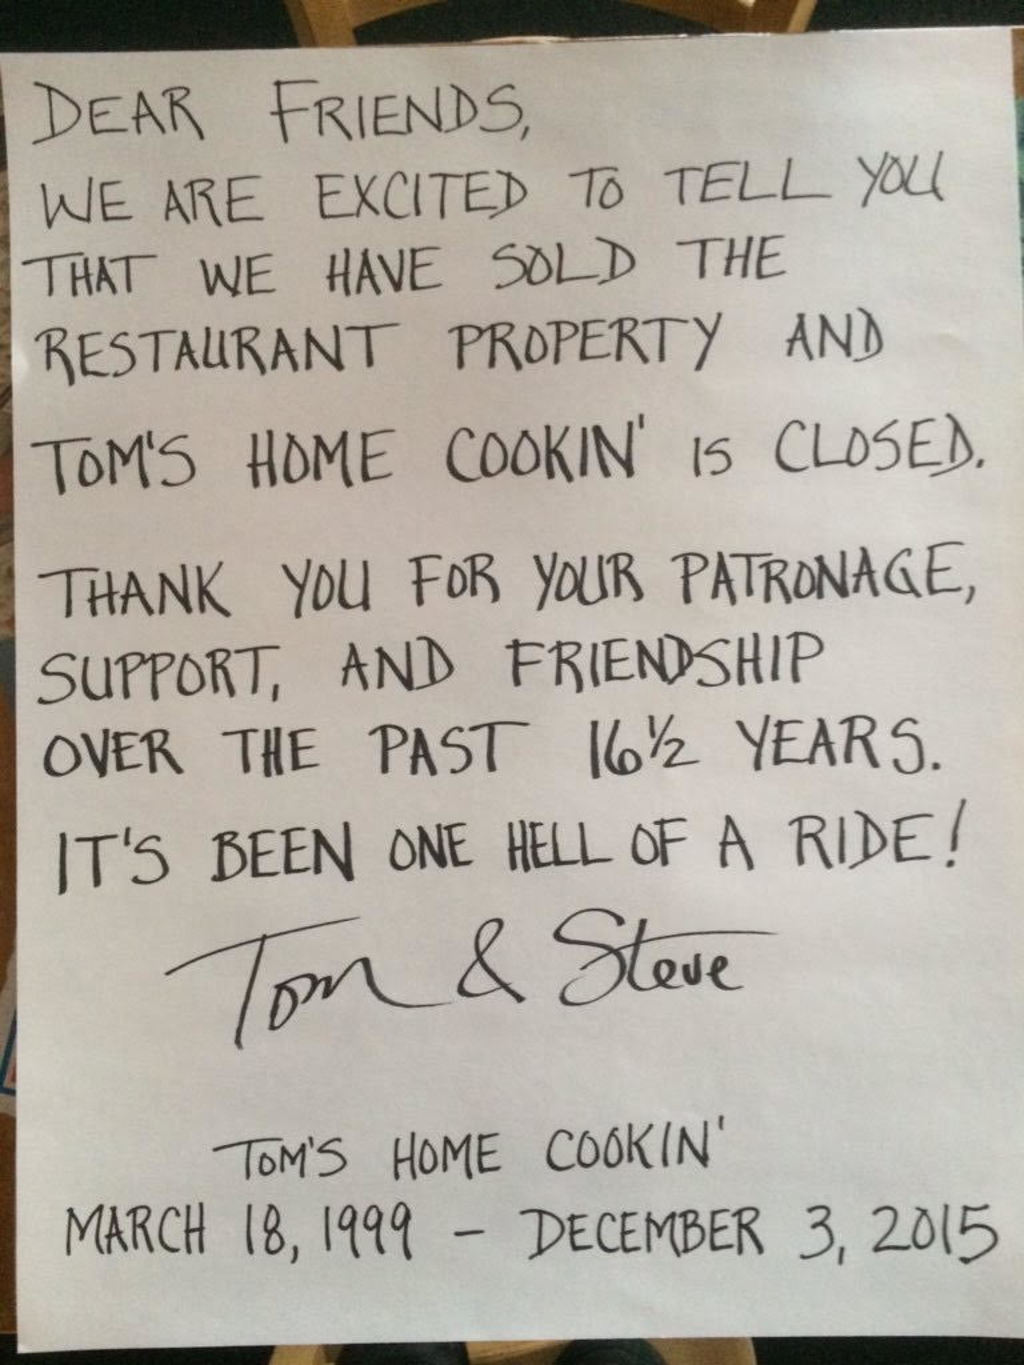 tom's home cooking closed